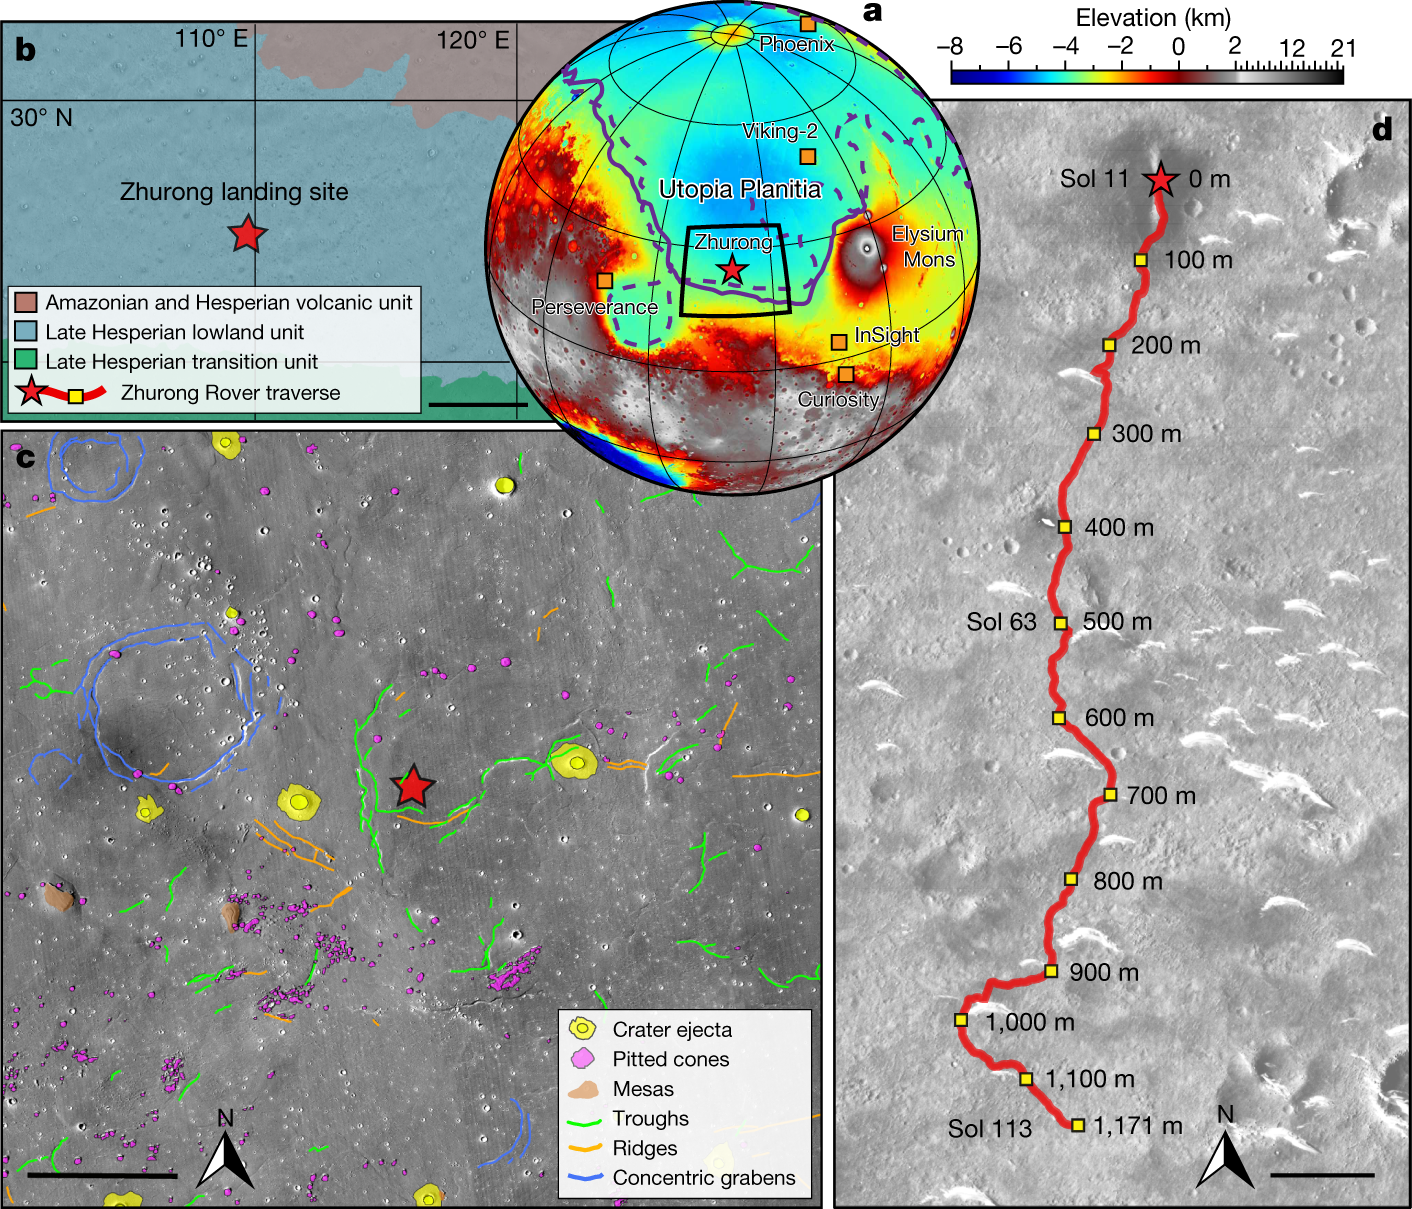 Layered subsurface in Utopia Basin of Mars revealed by Zhurong rover radar